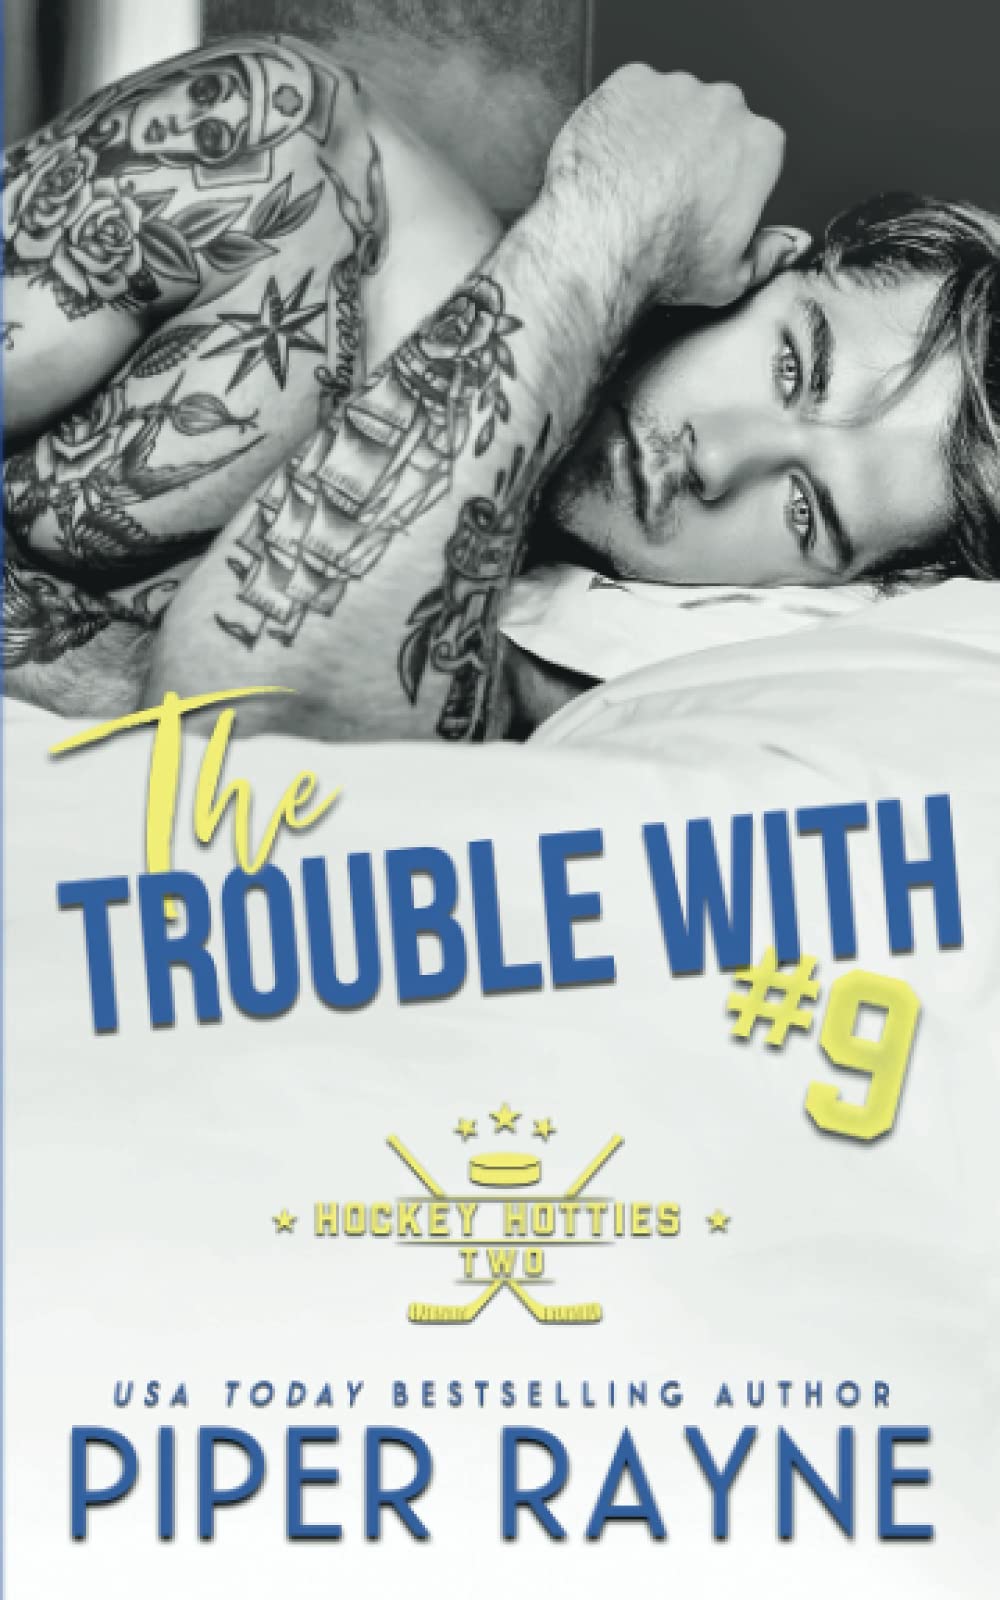 [EPUB] Hockey Hotties #2 The Trouble with #9 by Piper Rayne